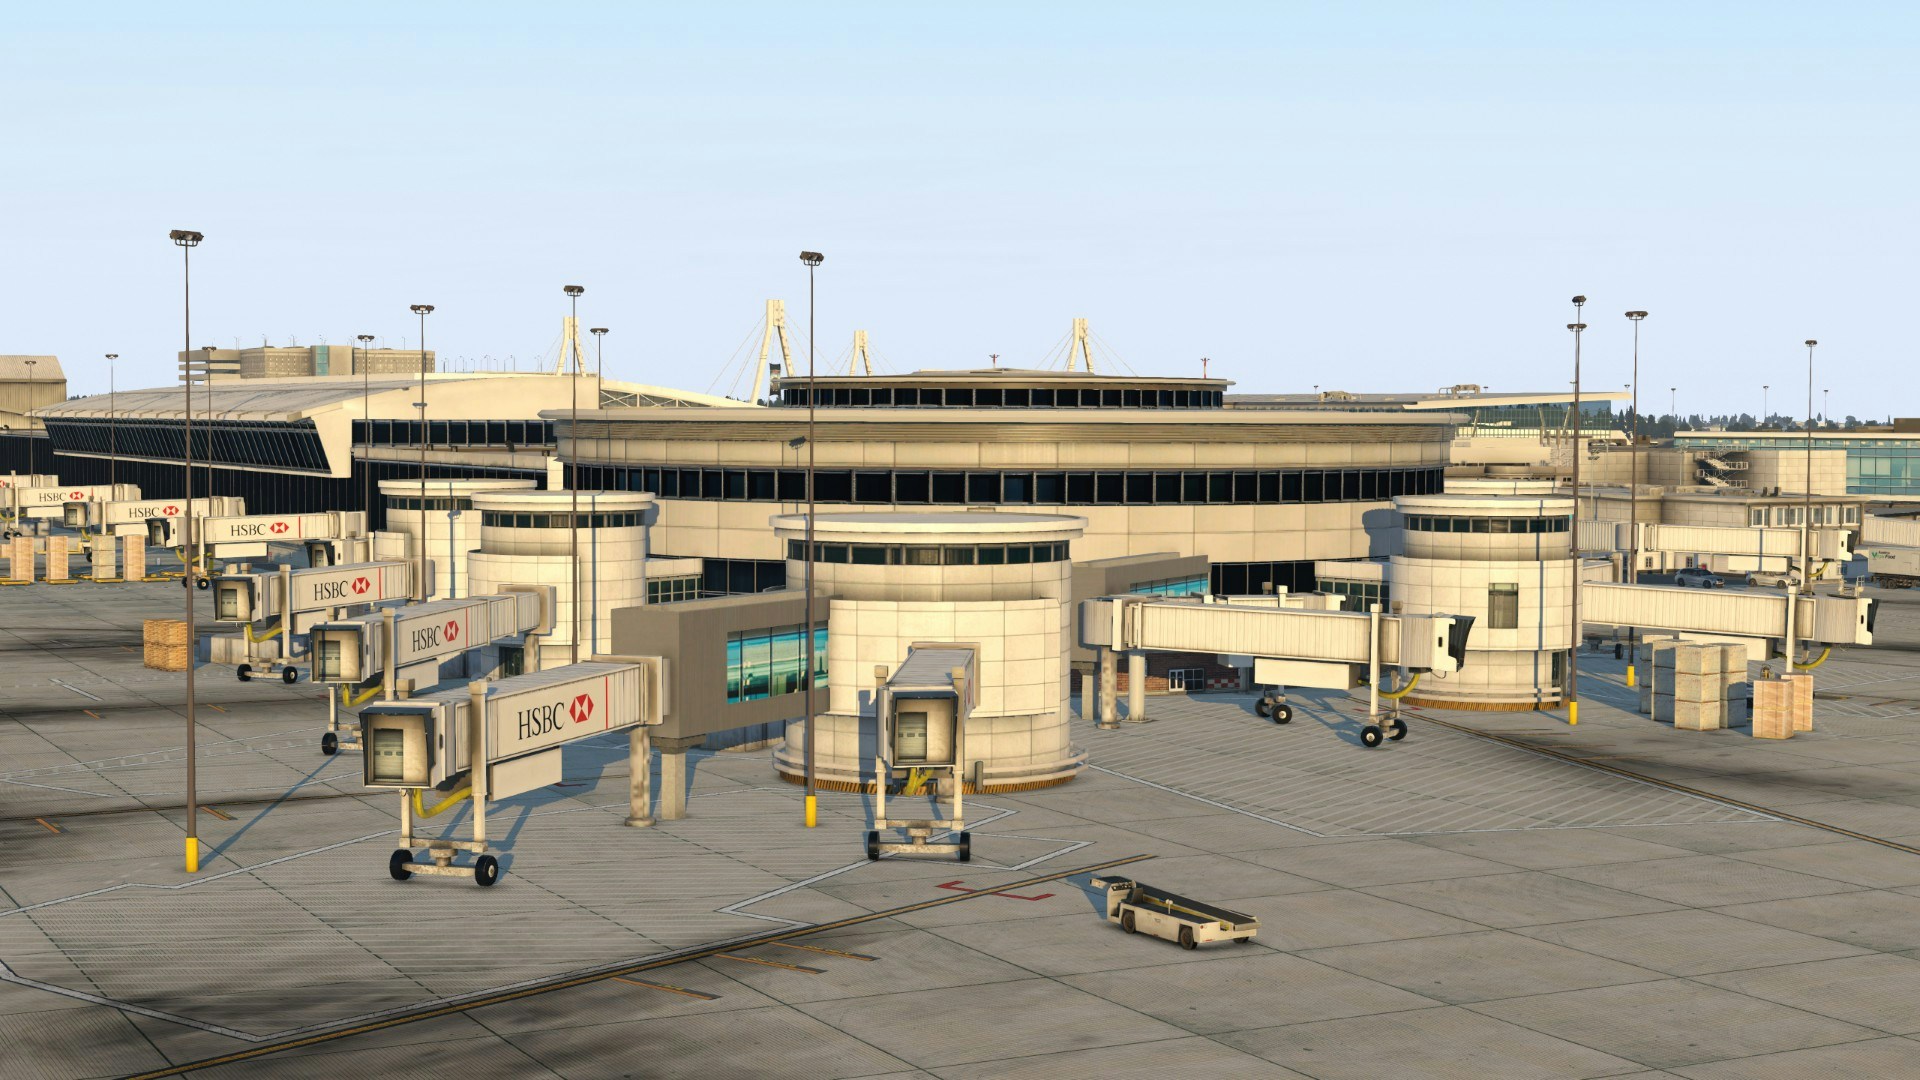 TaiModels Sydney Kingsford Smith for X-Plane 11 Now Available